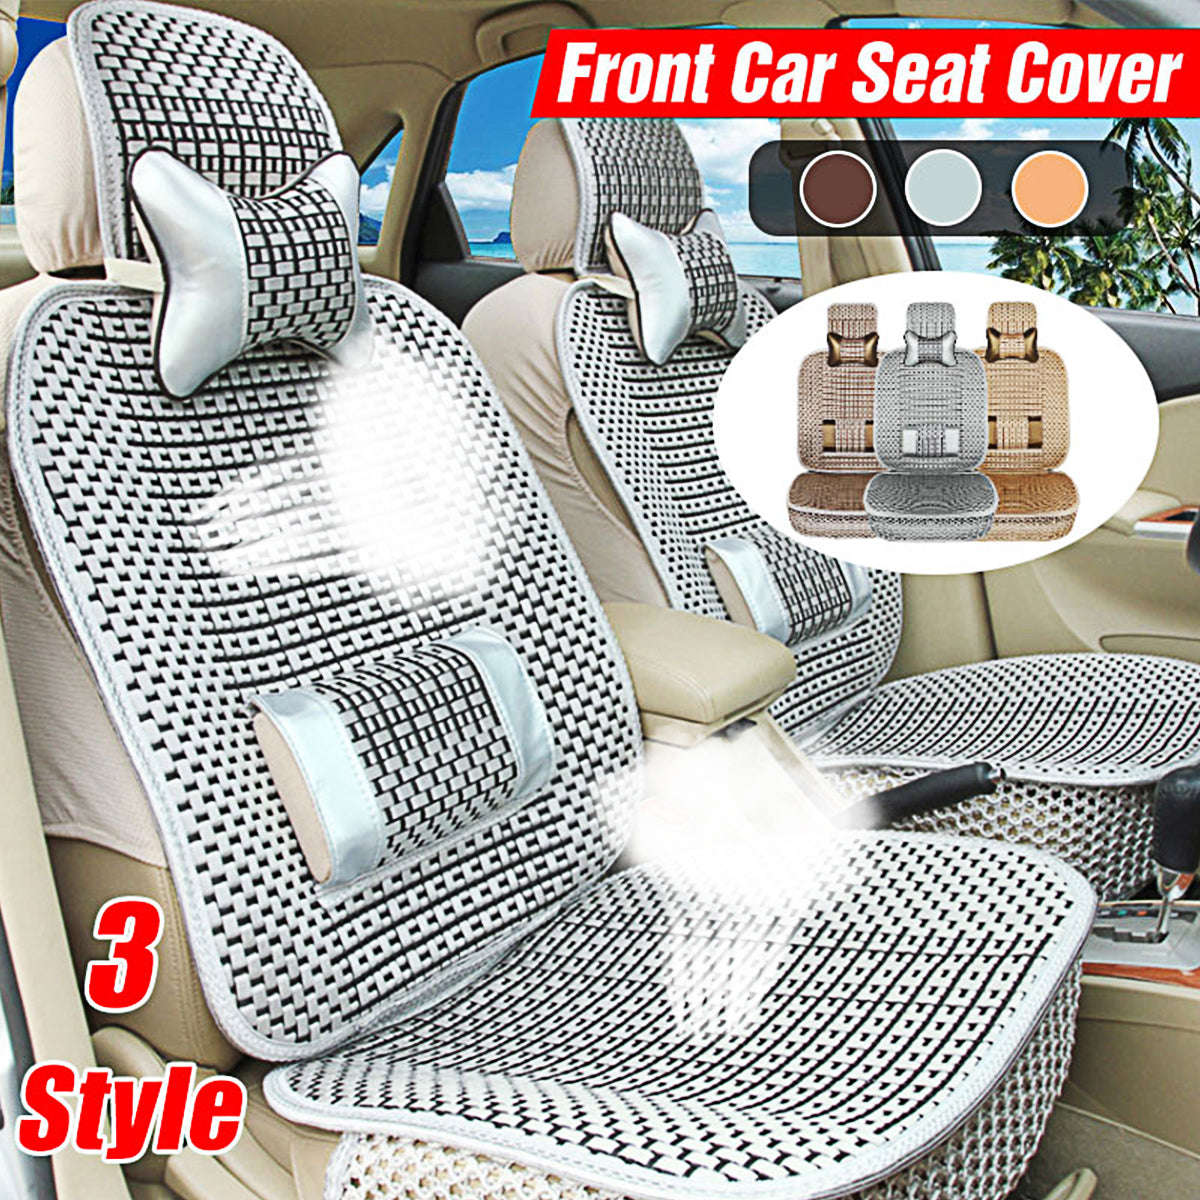 Universal Car Breathable Seat Cover Auto SUV Protector Cushion W/Pillow Summer - Auto GoShop